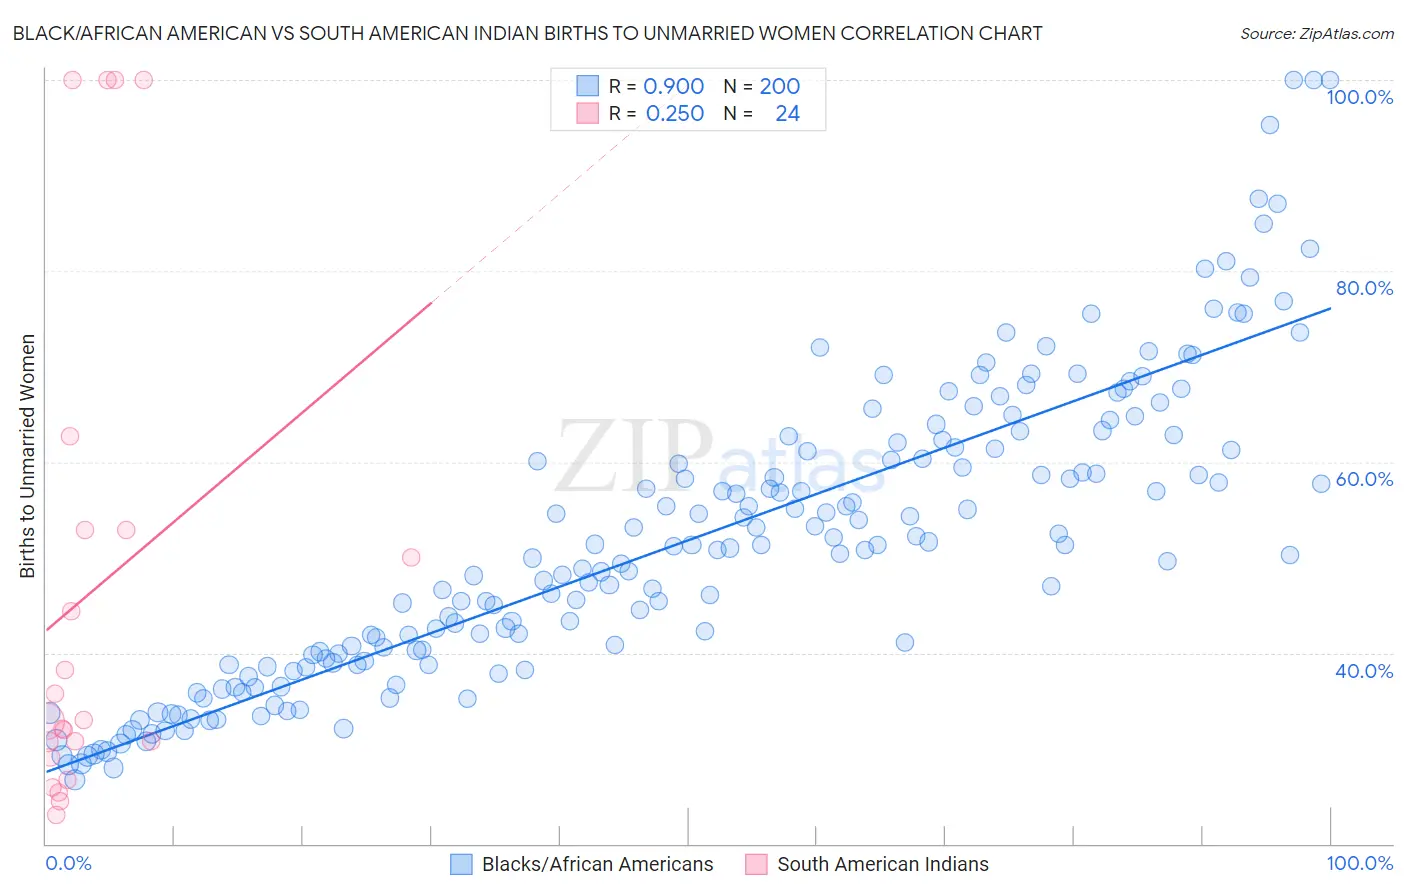 Black/African American vs South American Indian Births to Unmarried Women